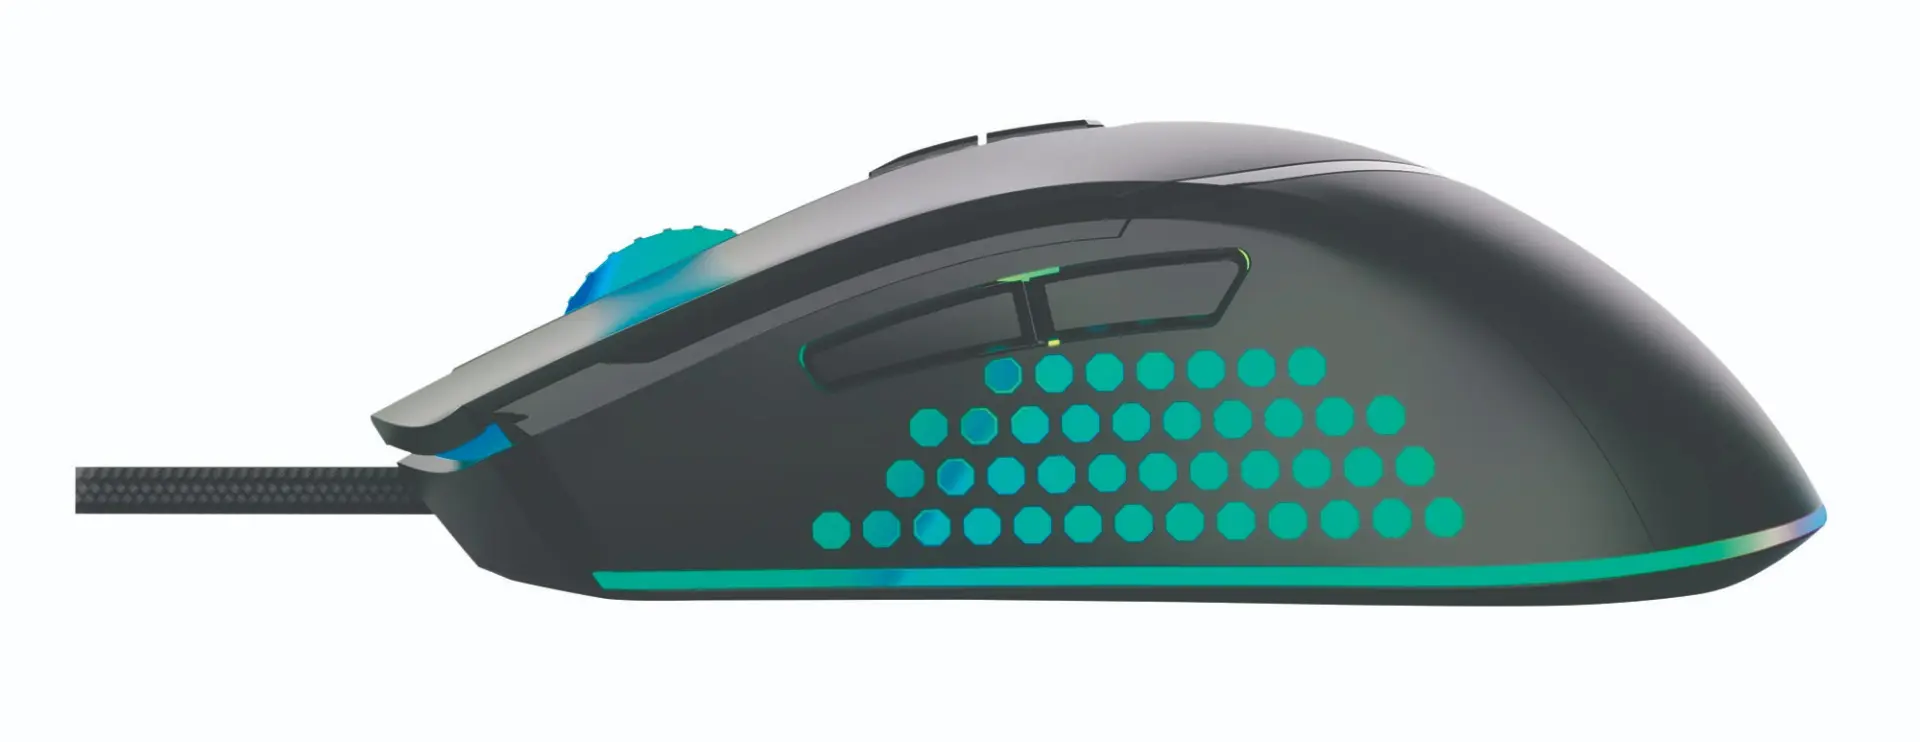 Mouse Gaming Serioux Yden